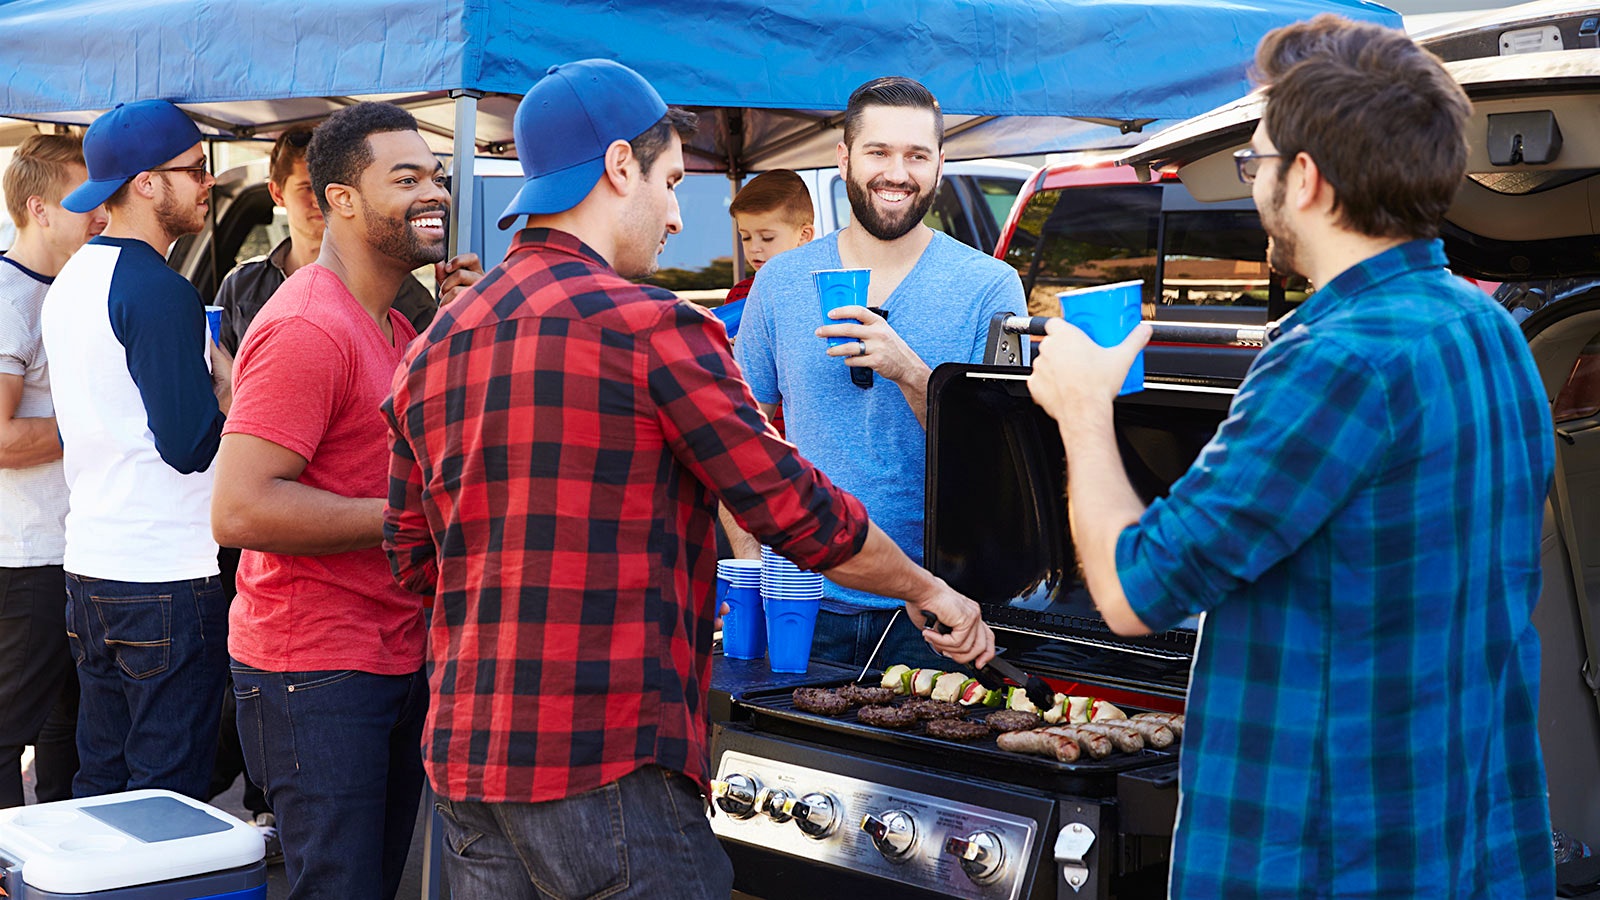  Group of men at a tailgate gathered around a grill, drinking out of plastic cups